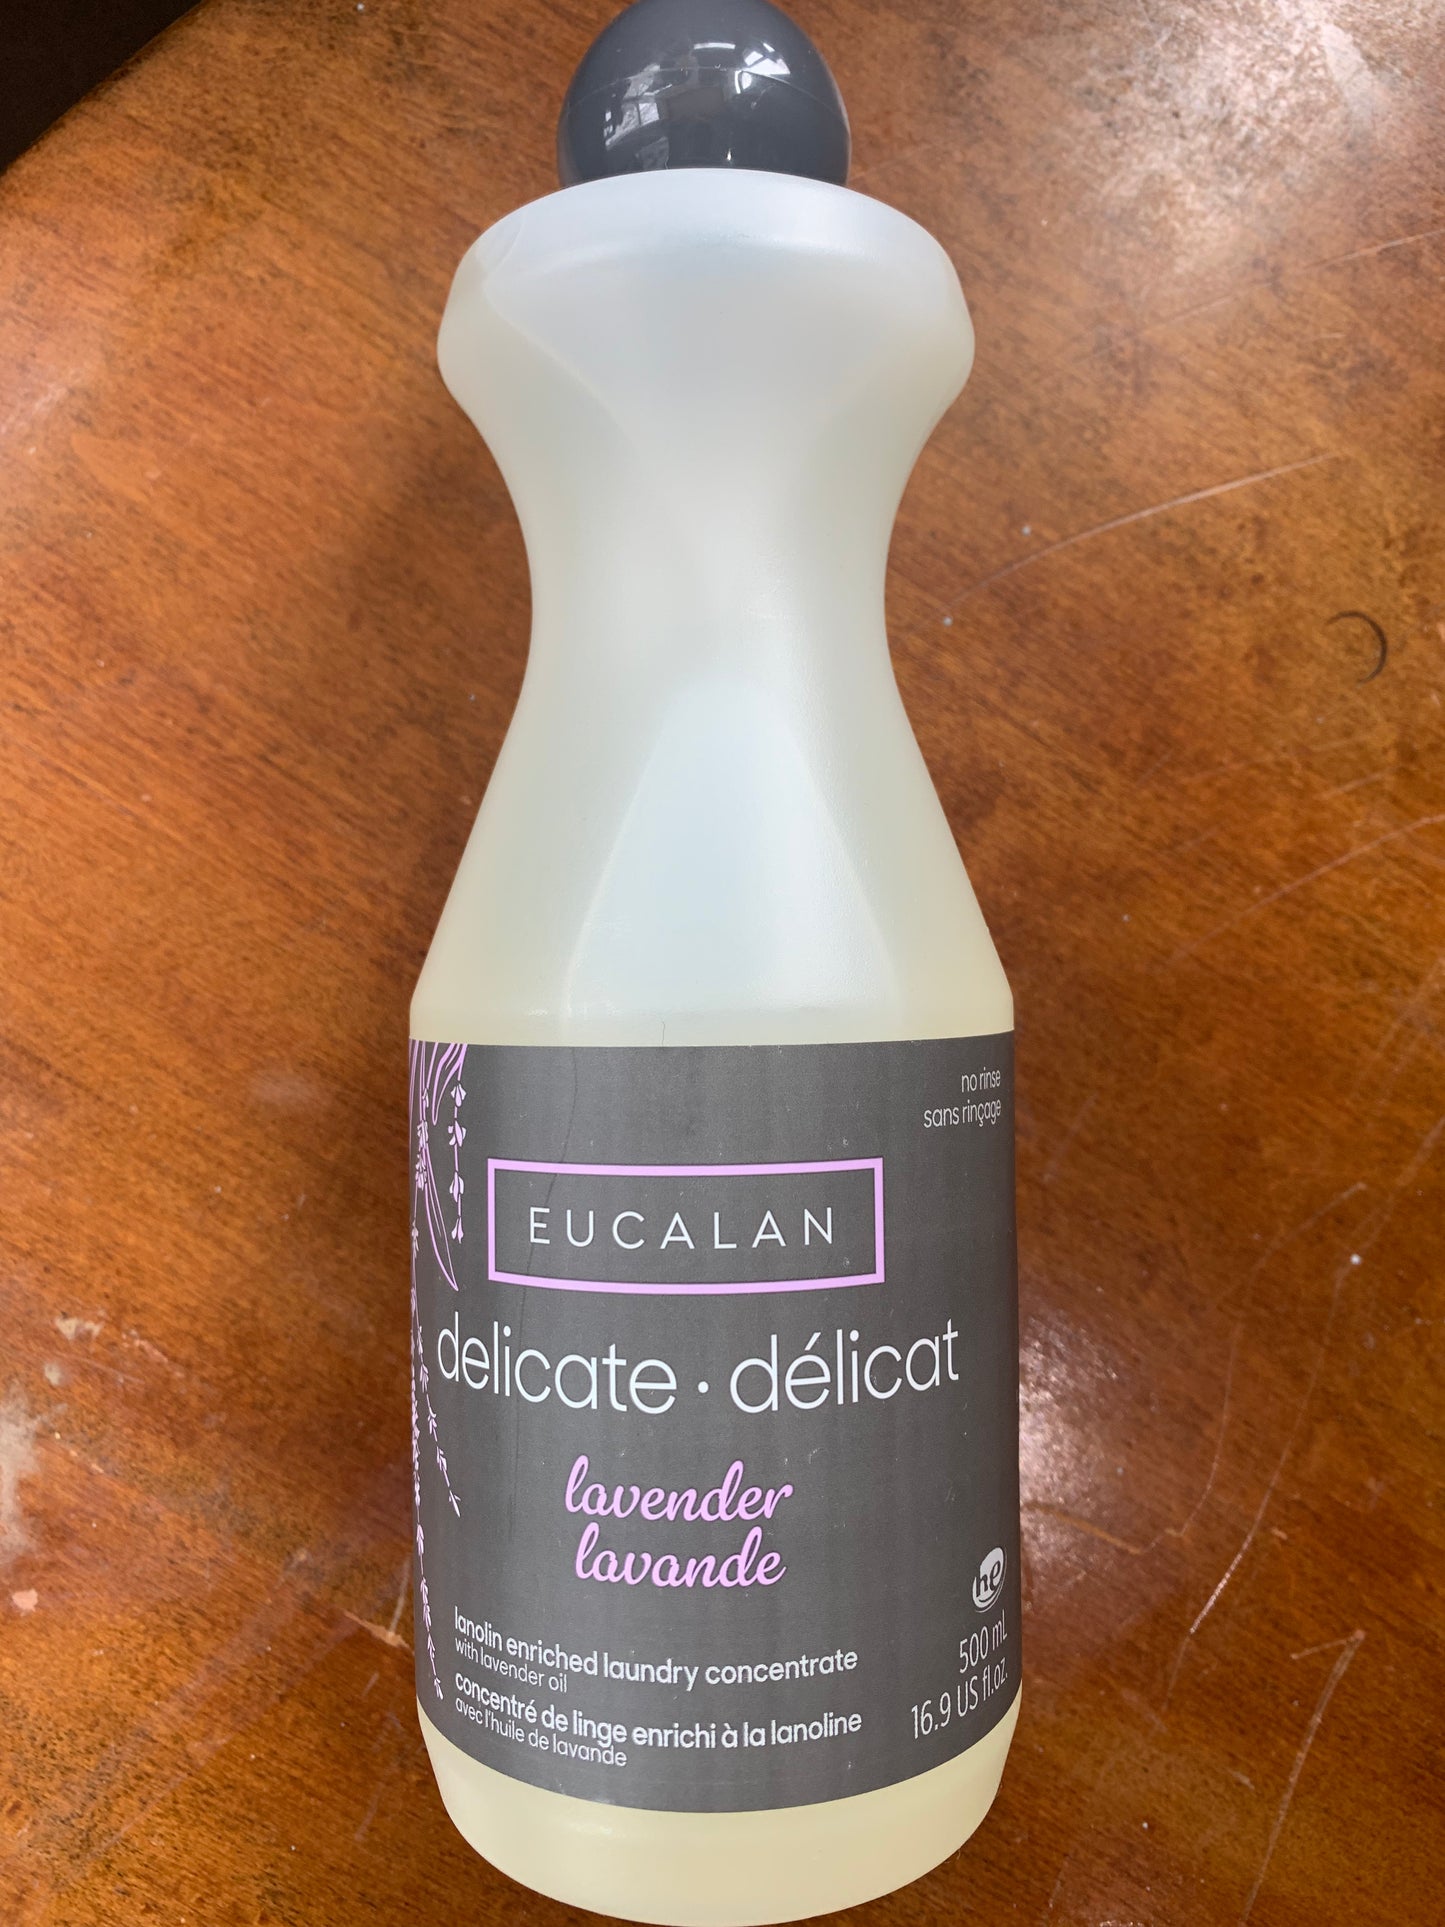 Eucalan Delicate - Lanolin enriched laundry concentrate